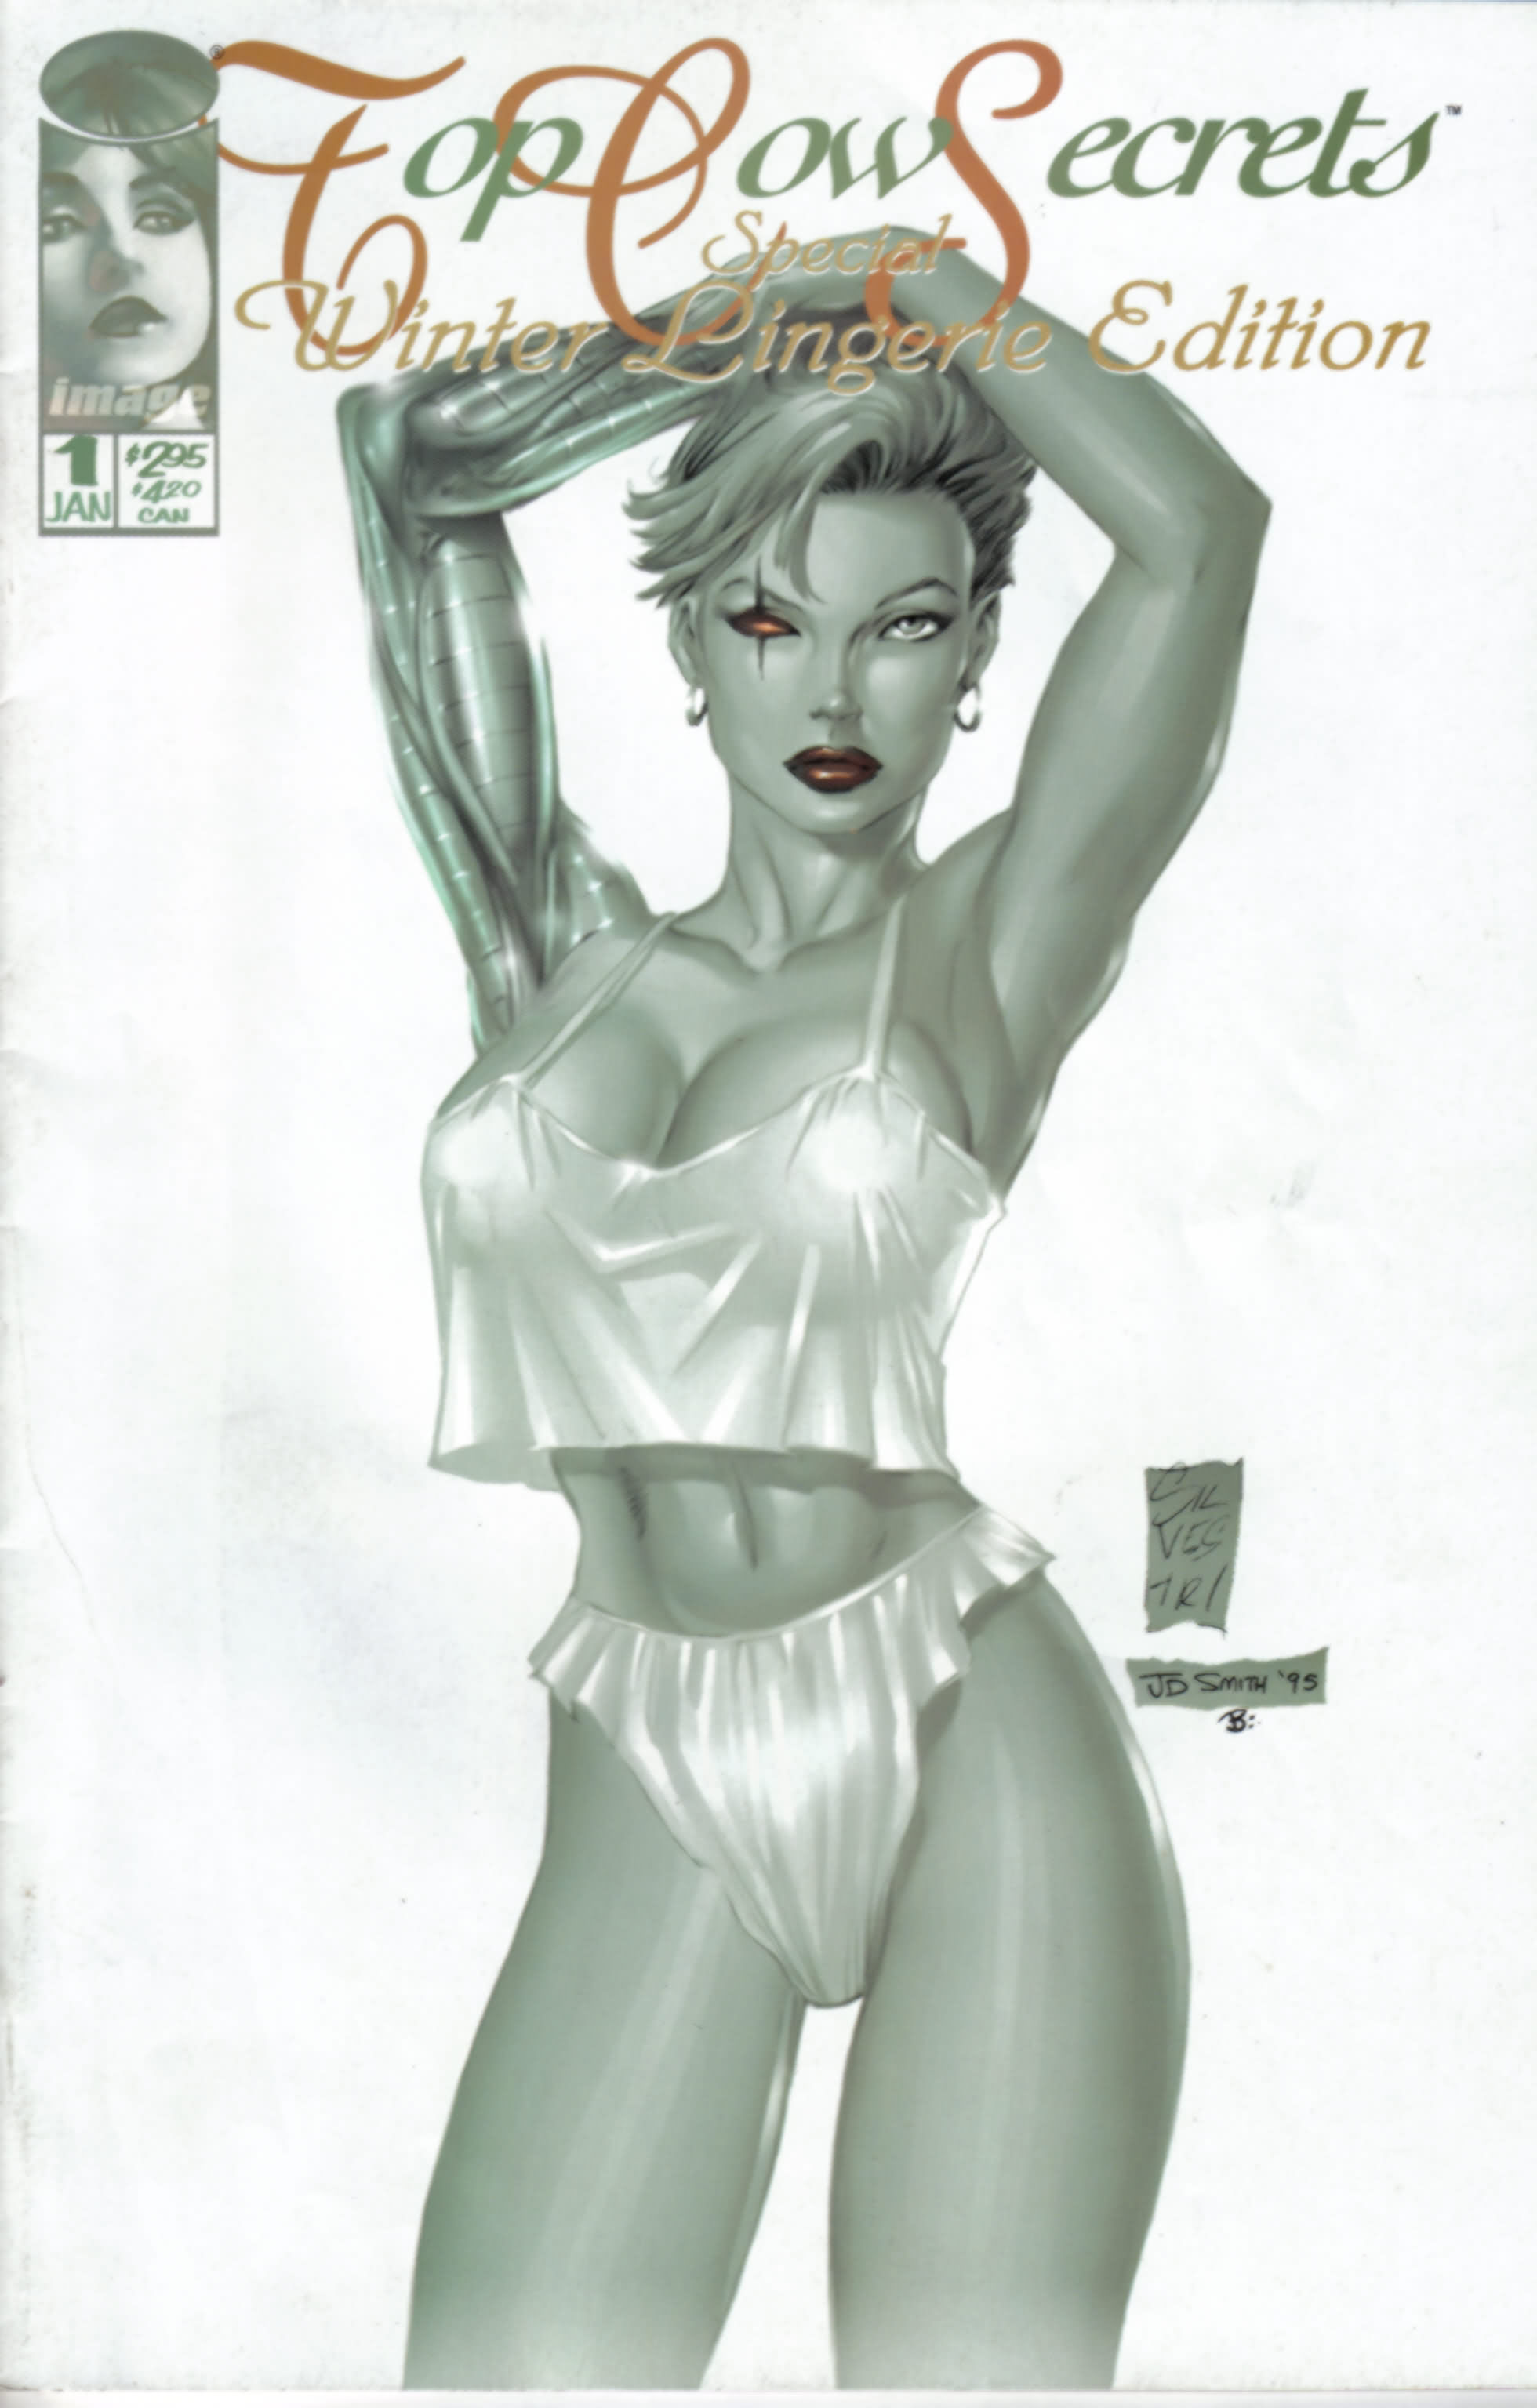 Read online Top Cow Secrets-Special Winter Lingerie Edition comic -  Issue # Full - 1